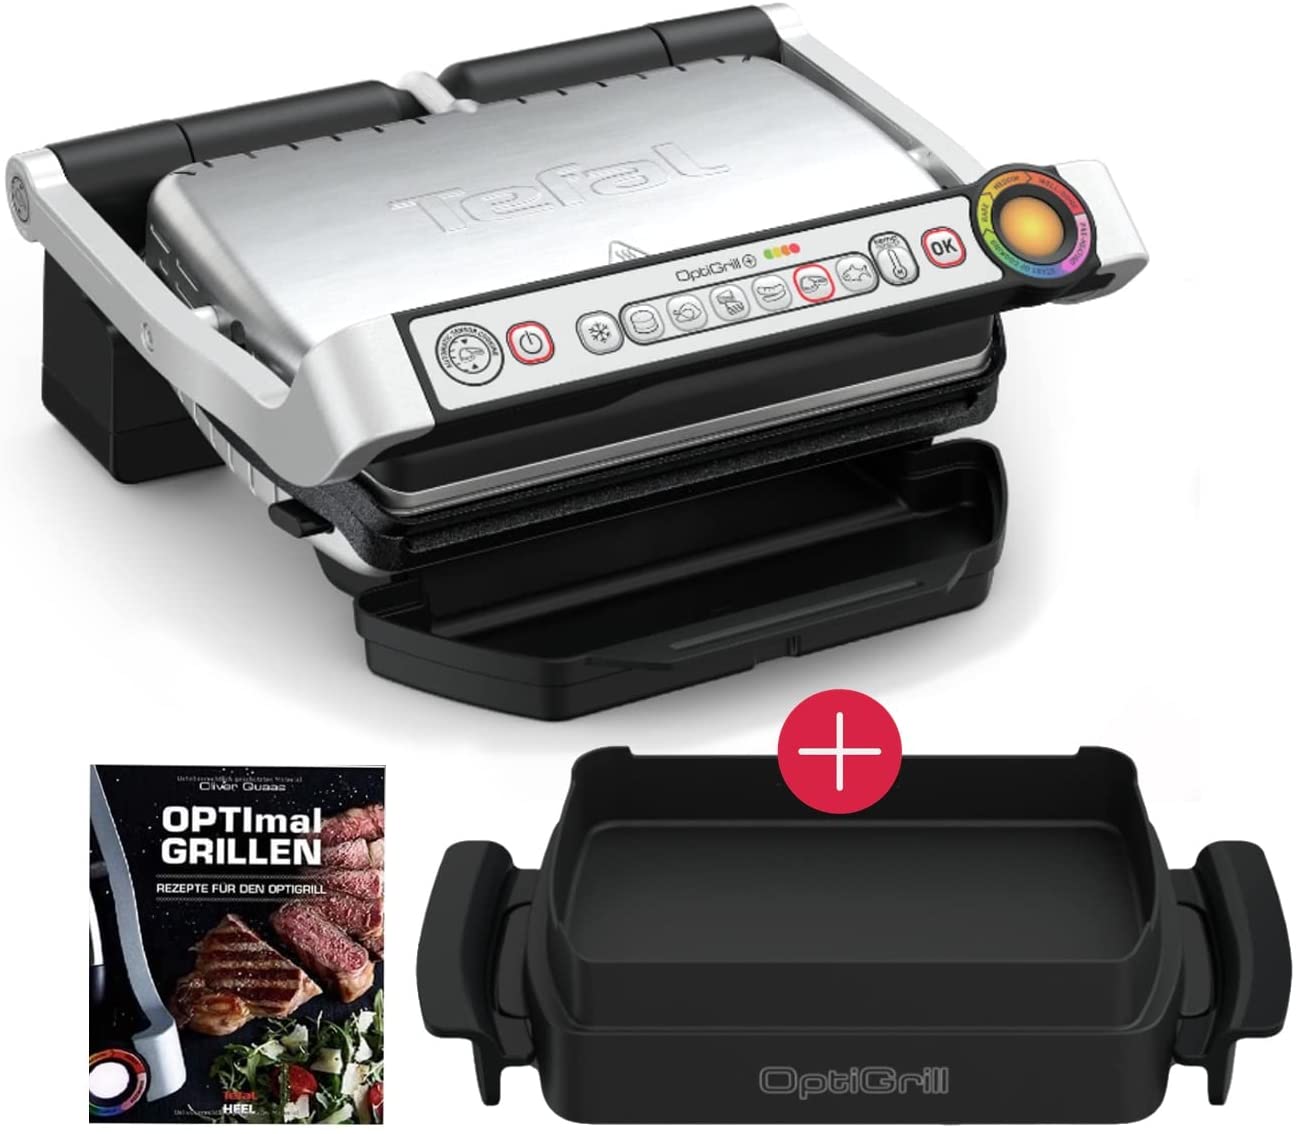 Tefal OptiGrill + Electric Contact Grill + XA7258 Snacking & Baking Baking Tray + Optigrill Recipe Book, 6 Grill Programmes Indoor Electric Grill | Ideal Grilling Results | Non-Stick Cast Aluminium Plates